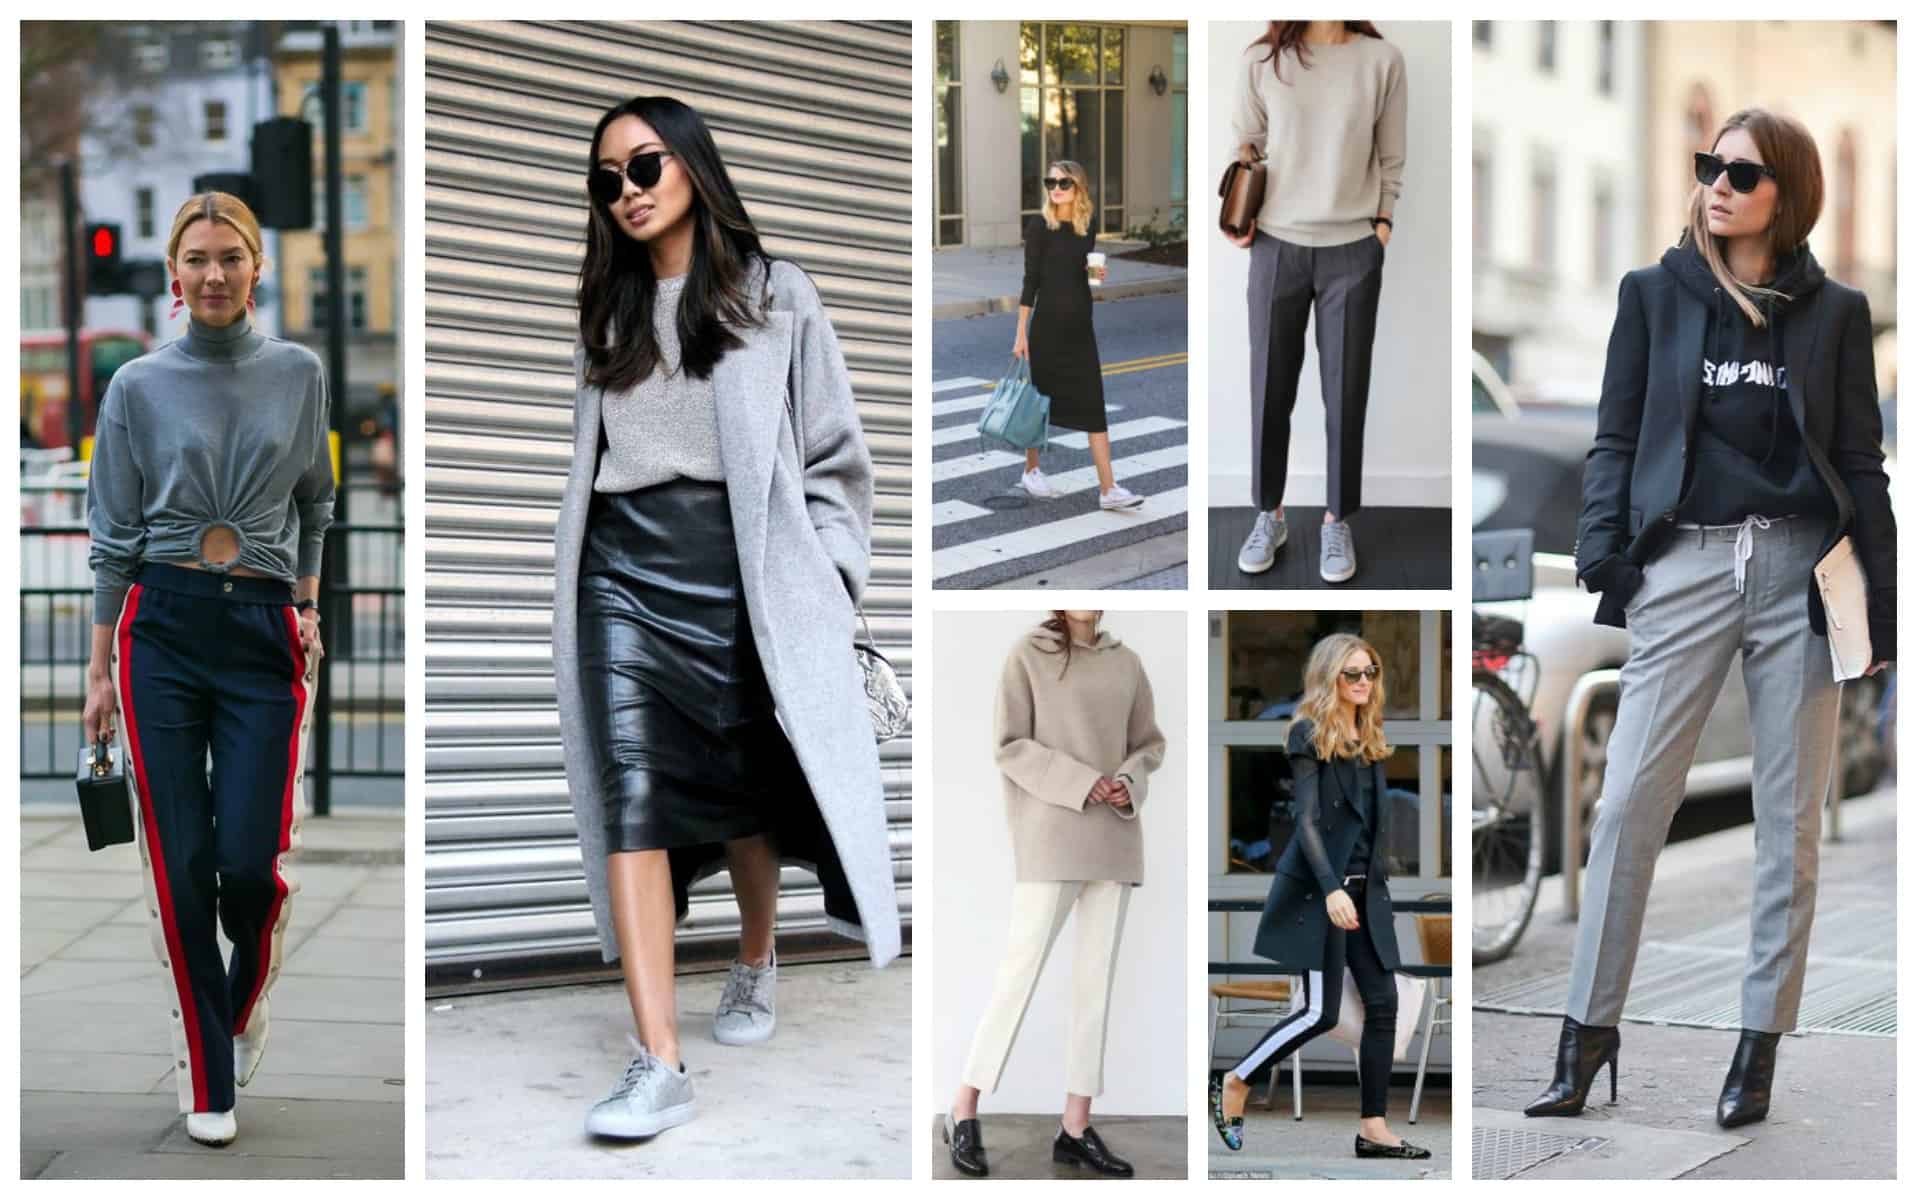 REVIEWS: Rain Jackets, Comfy Athleisure and Loungewear, Stretchy Work Pants,  and More! | Work wear women, Black pants outfit, Black dress pants outfits